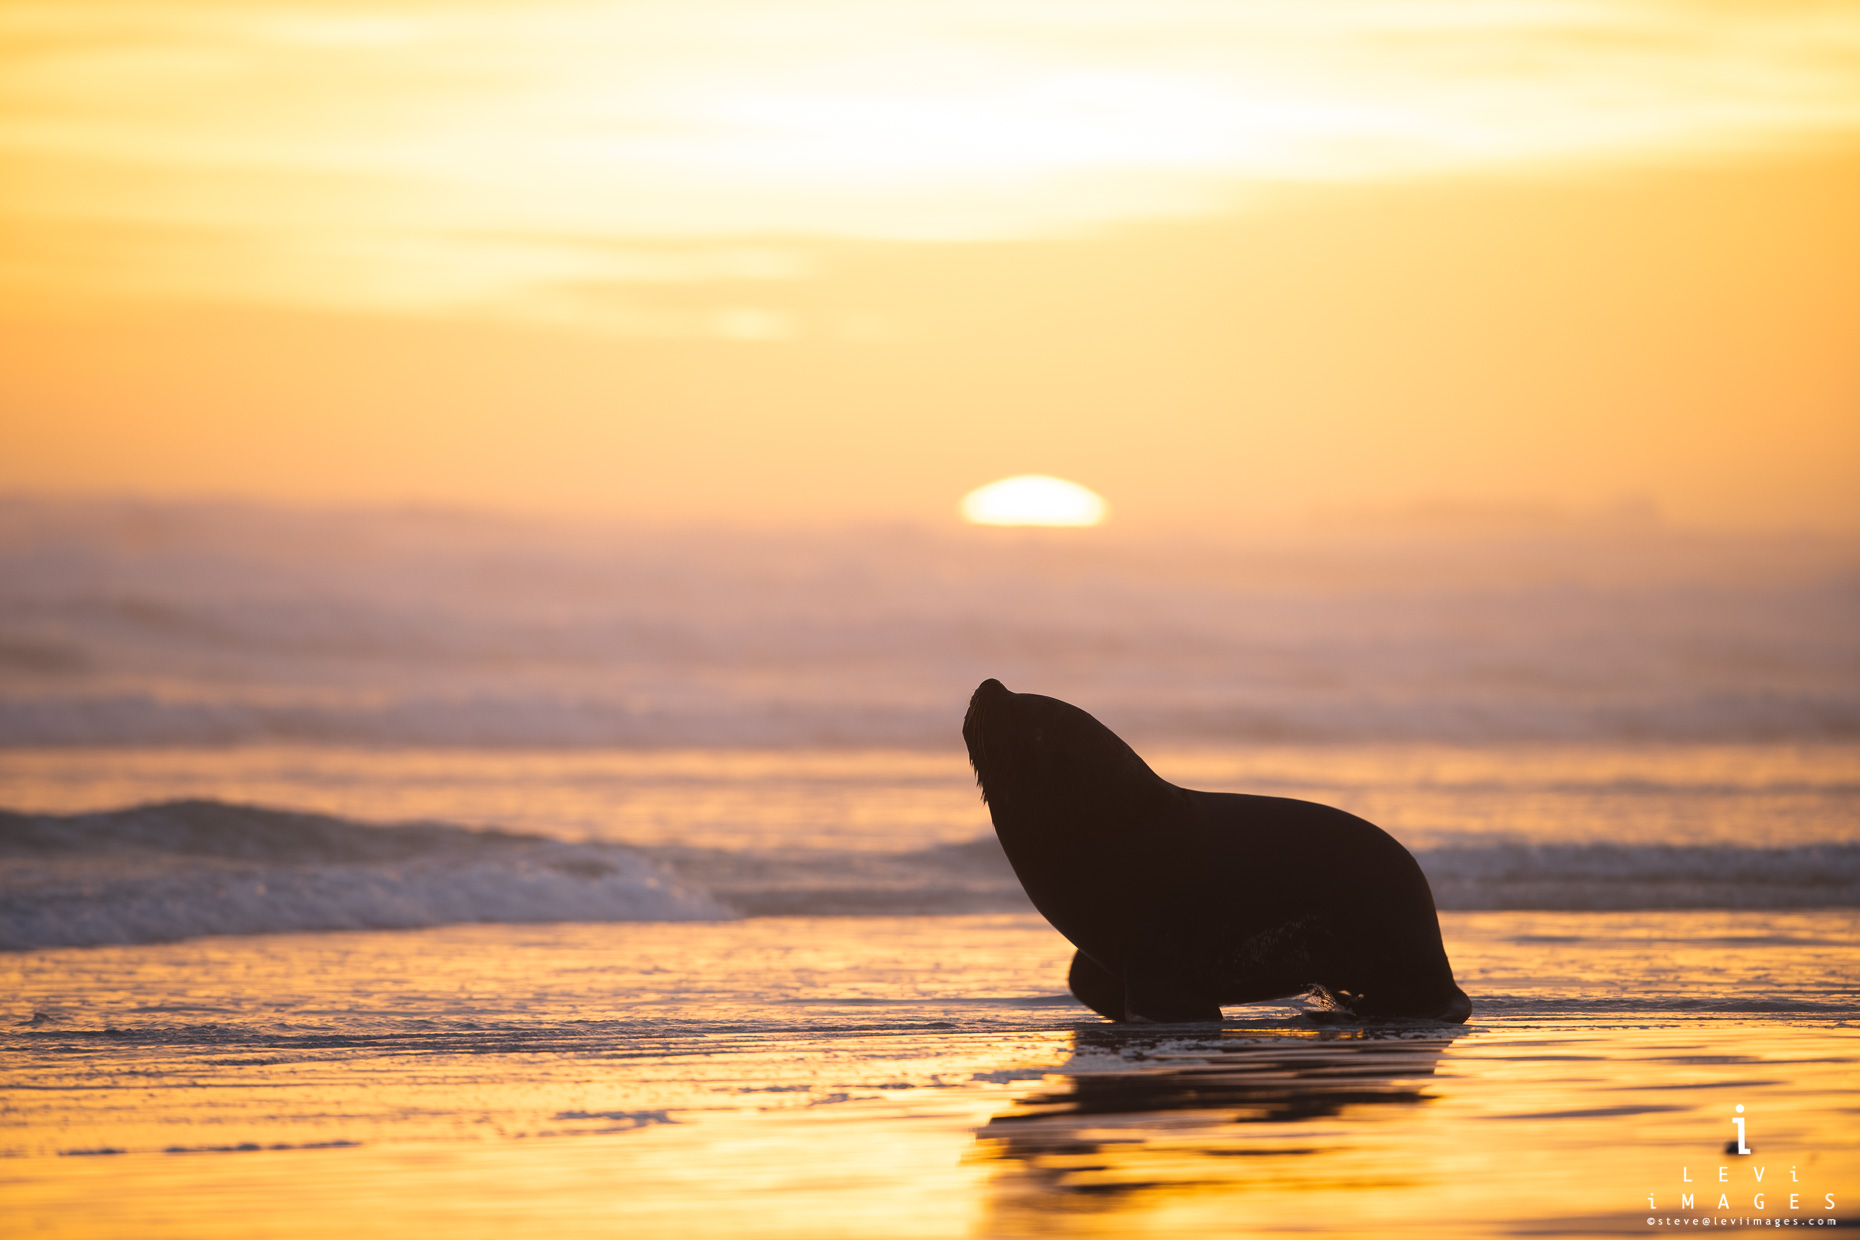 South American sea lion (Otaria flavescens) silhouette at beach with setting sun. Volunteer Point, Falkland Islands